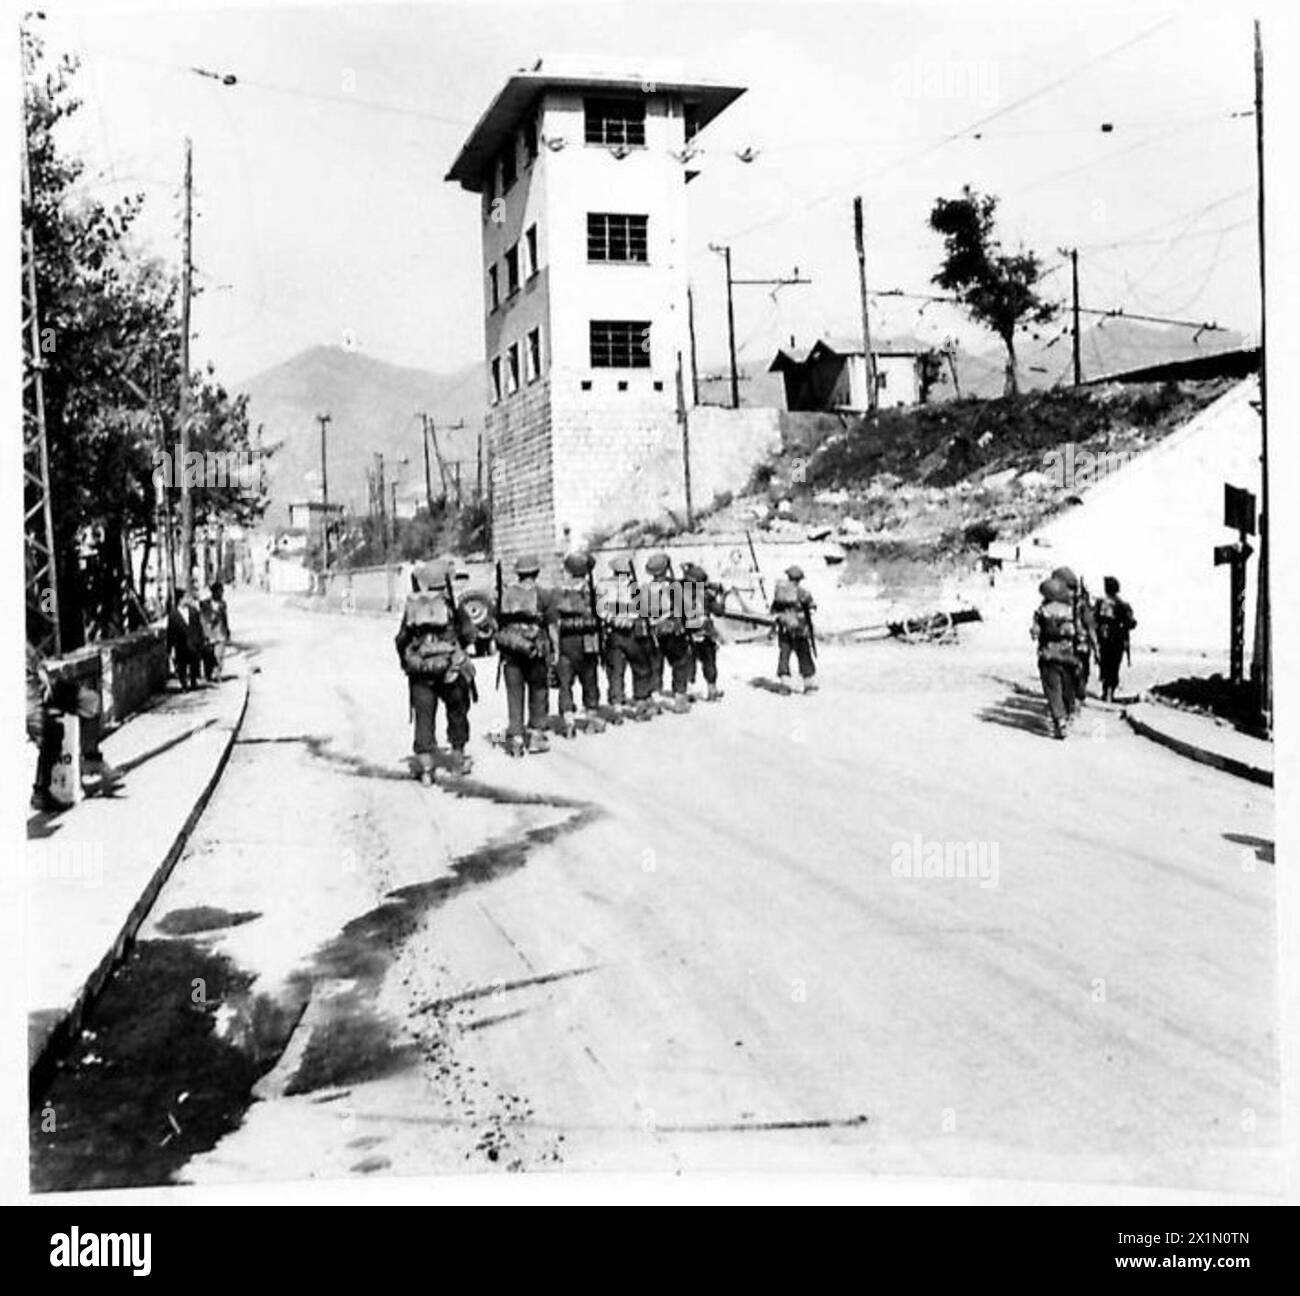 THE BRITISH ARMY IN NORTH AFRICA, SICILY, ITALY, THE BALKANS AND AUSTRIA 1942-1946 - British Infantry trrops of the Yorks and Lancs REgiment entering the outskirts of Salerno, , British Army Stock Photo